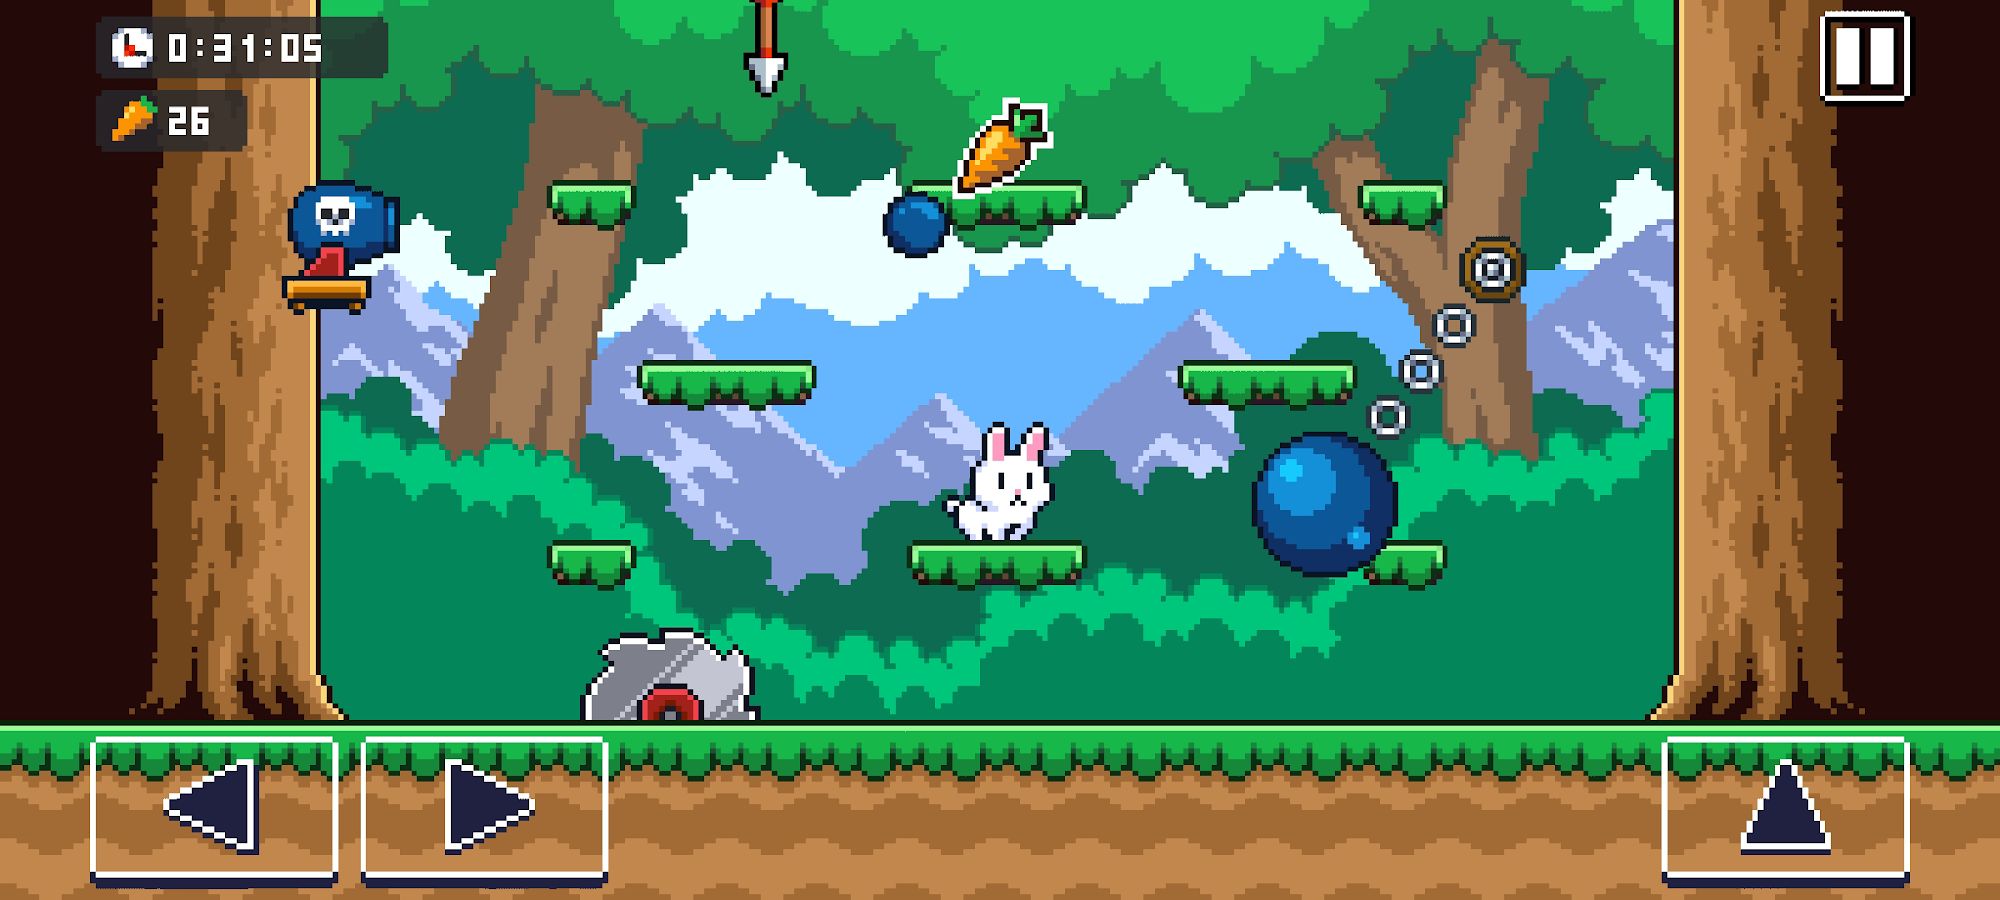 Full version of Android Multiplayer game apk Poor Bunny! for tablet and phone.